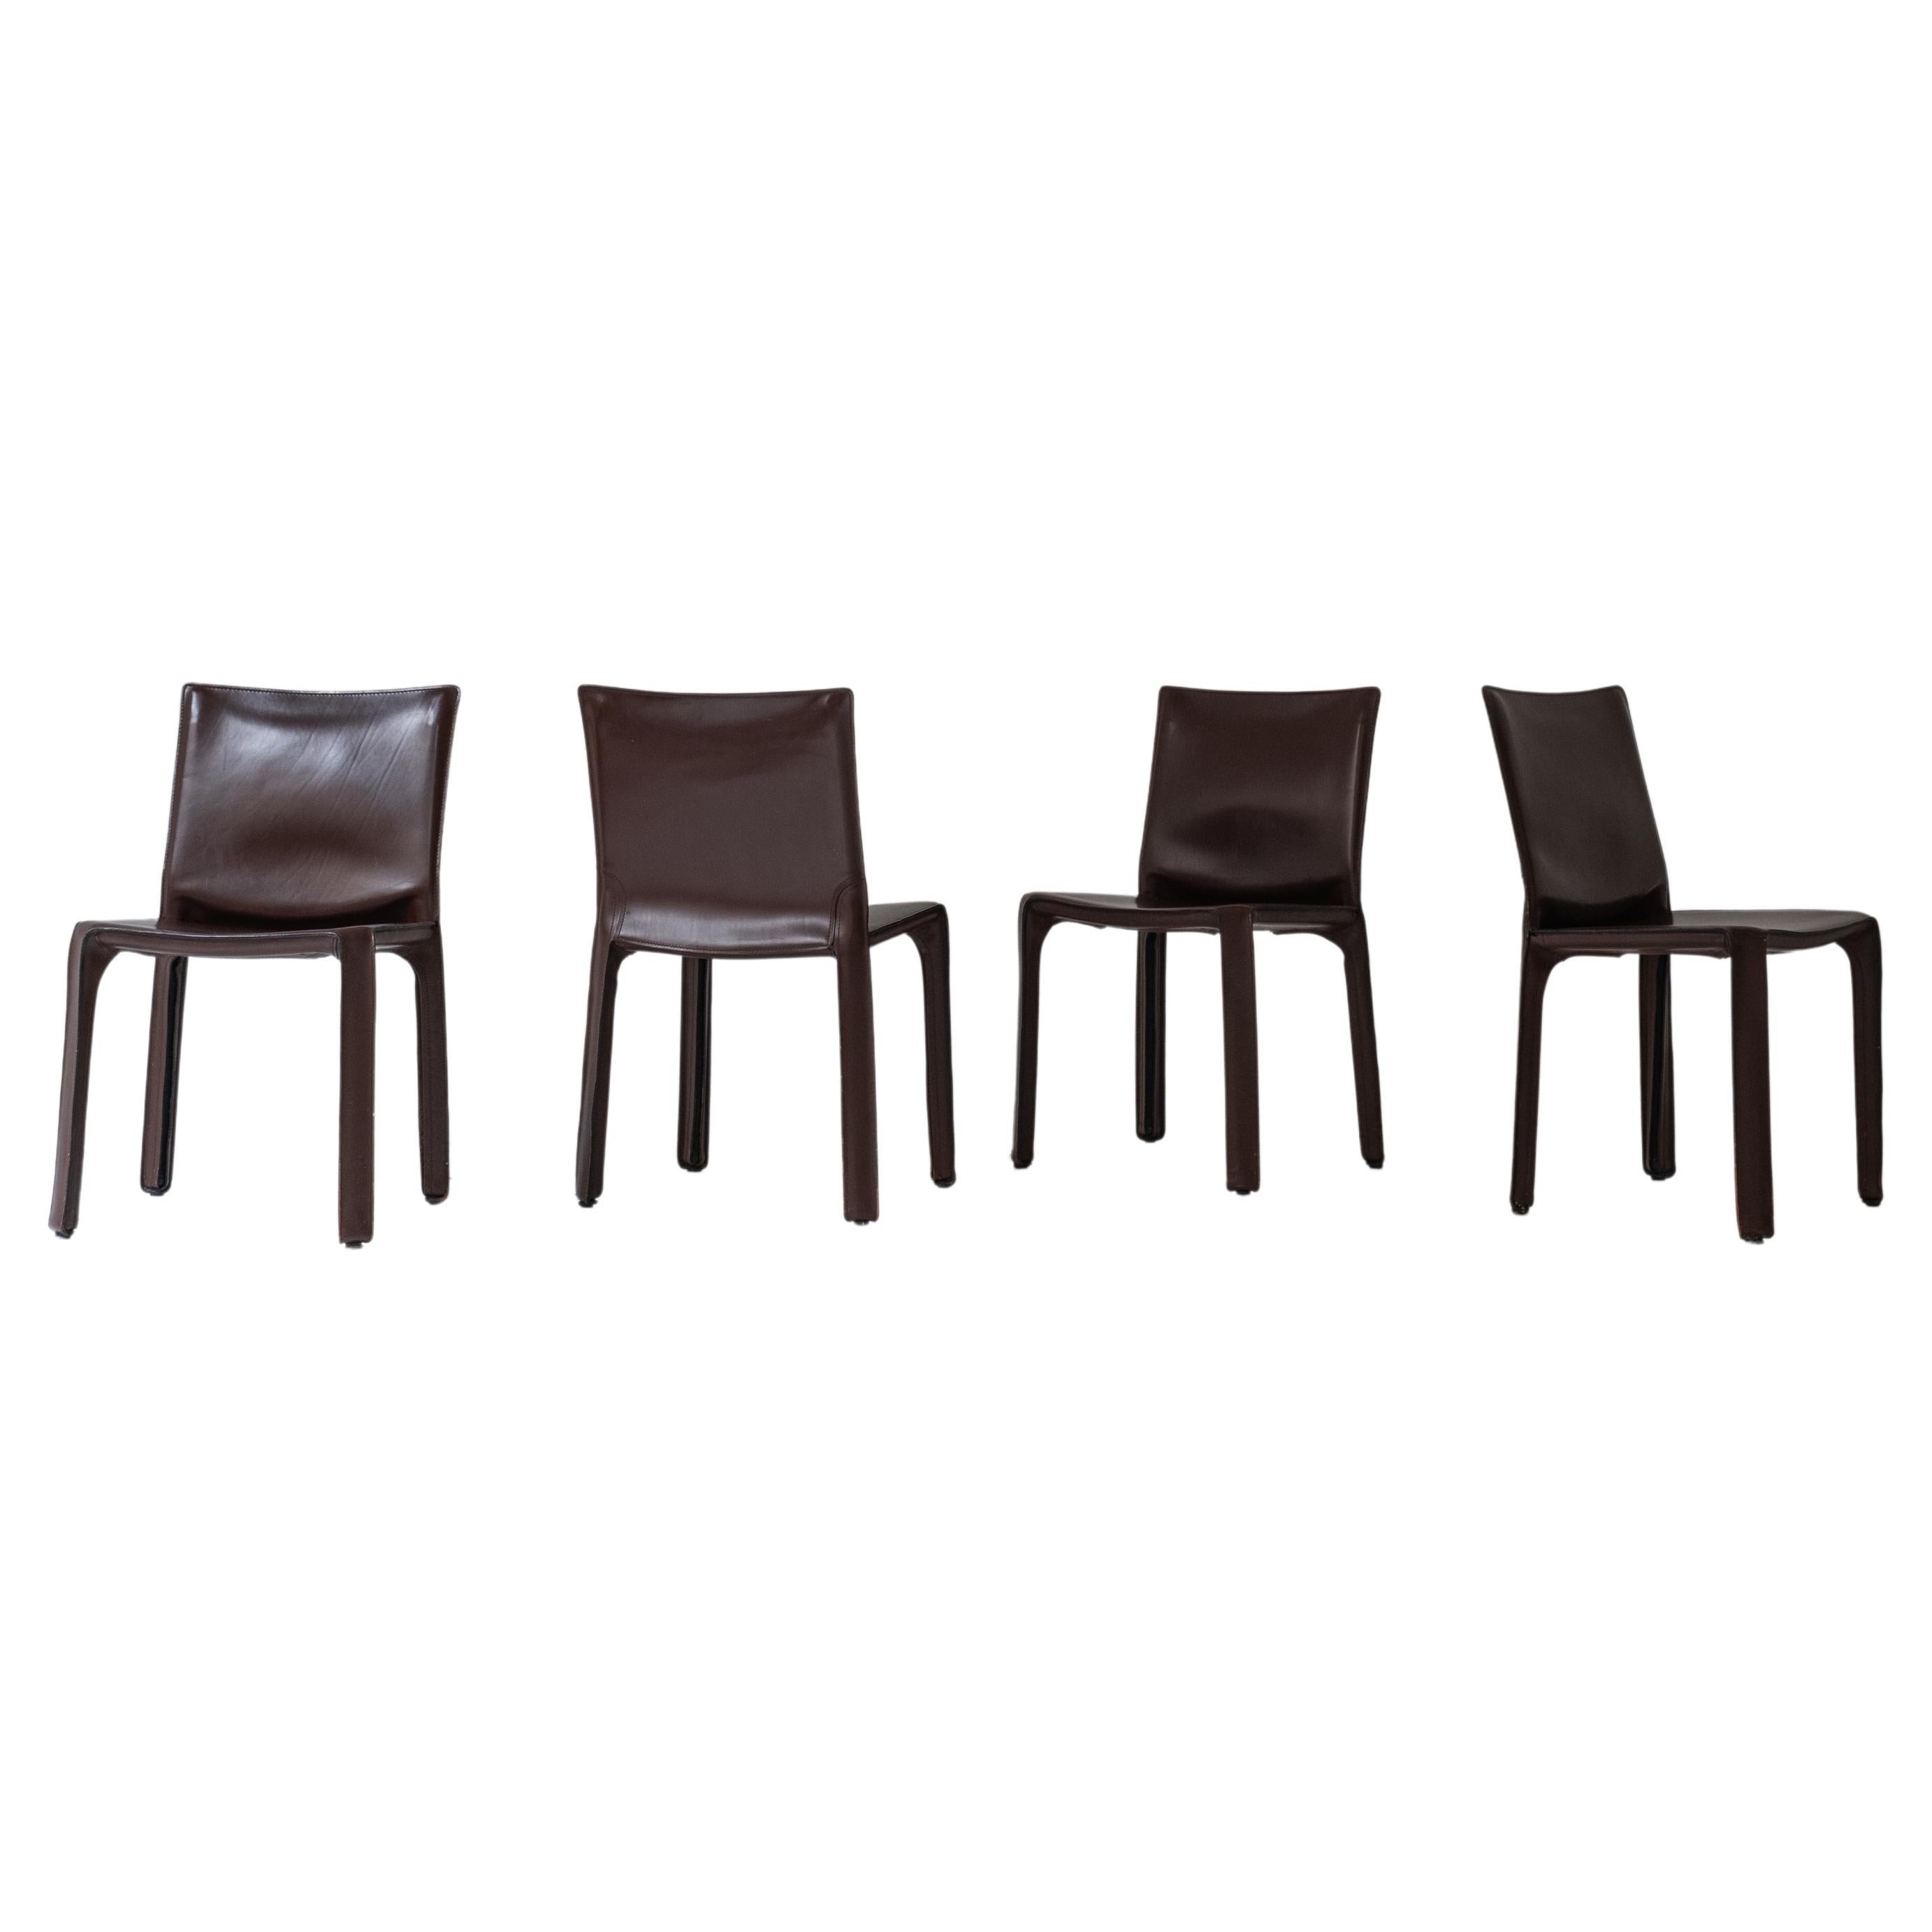 Set of 4 “413” Cab Chairs by Mario Bellini for Cassina, Italy, 1977 For Sale